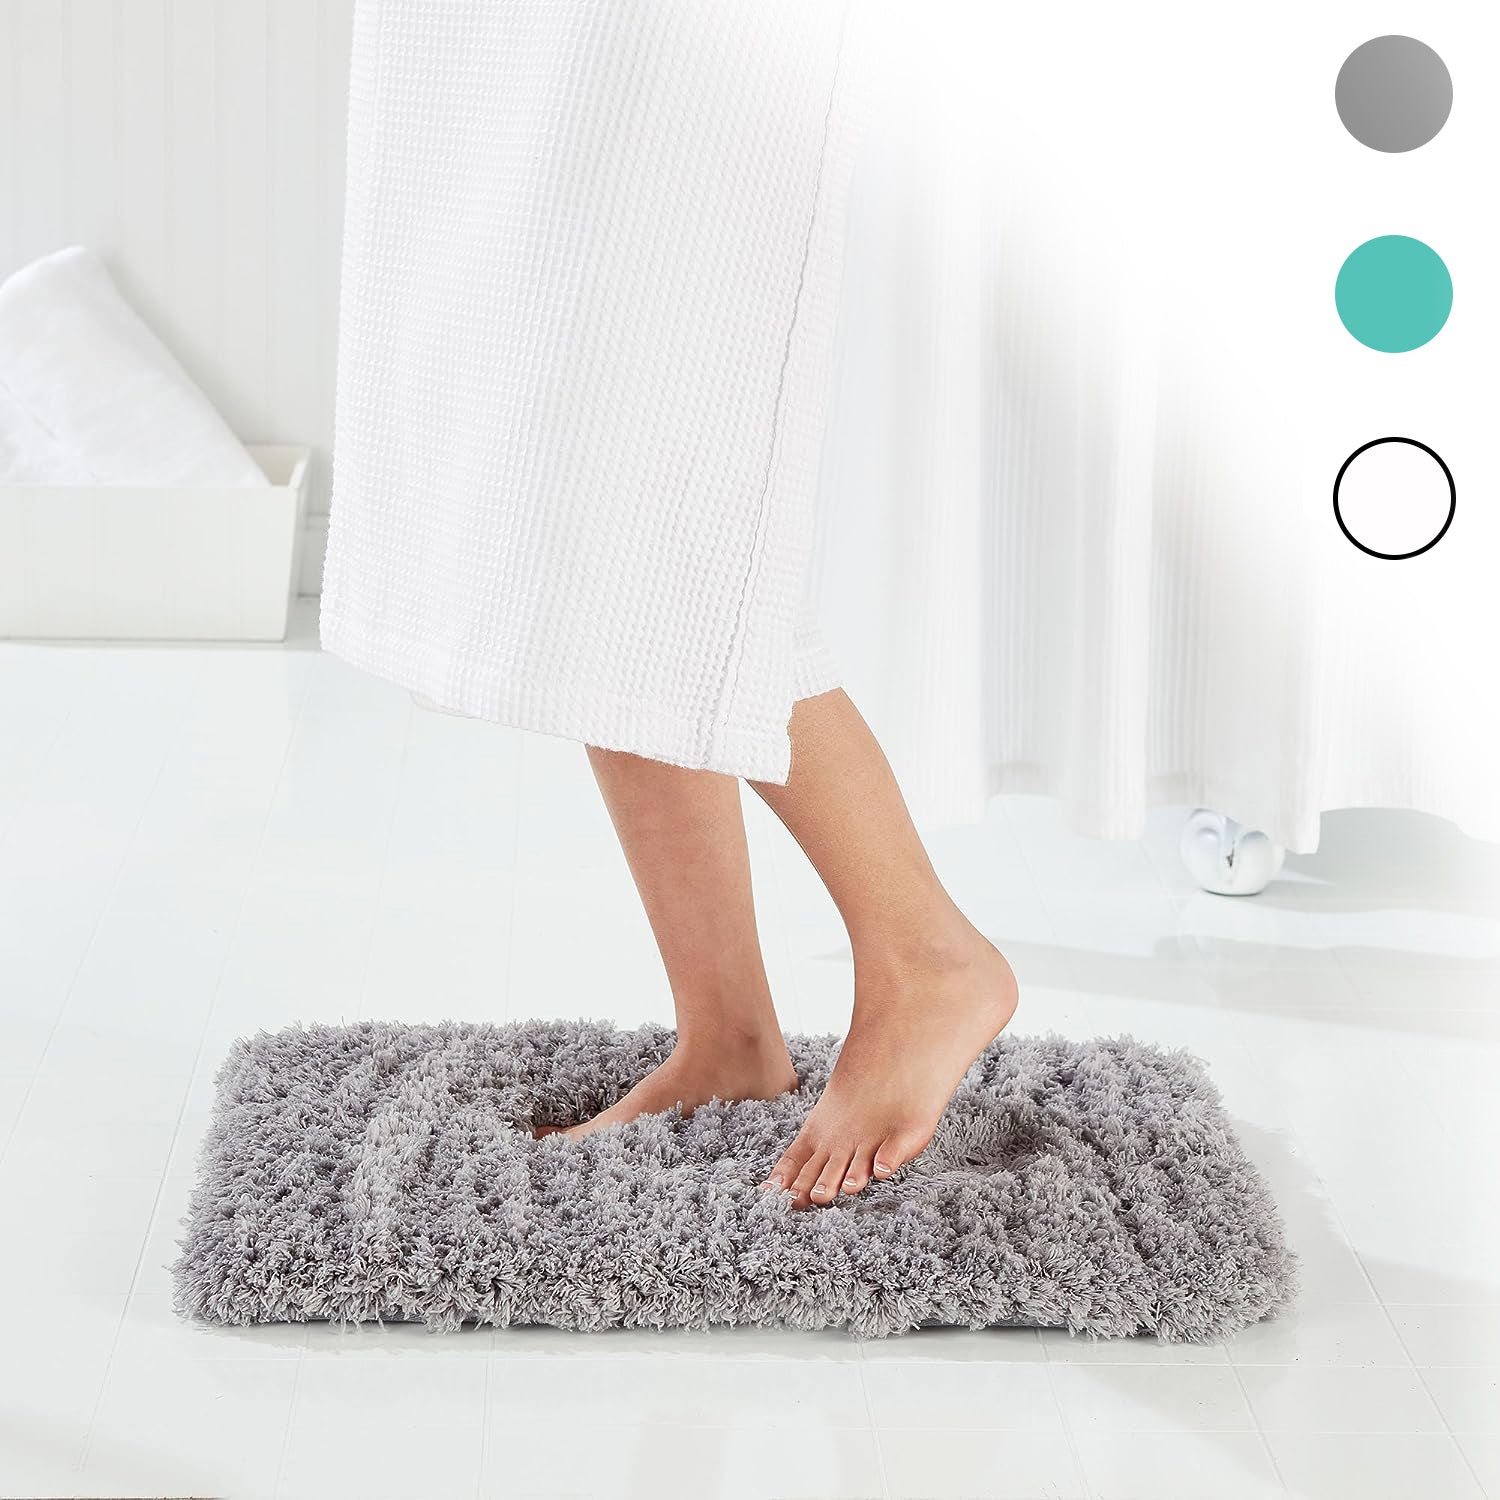 OEAKAY Bath Mat Bathroom Rug Absorbent Non-Slip Washable Shower Floor Mats  Carpet 20x32,Turquoise Teal and White